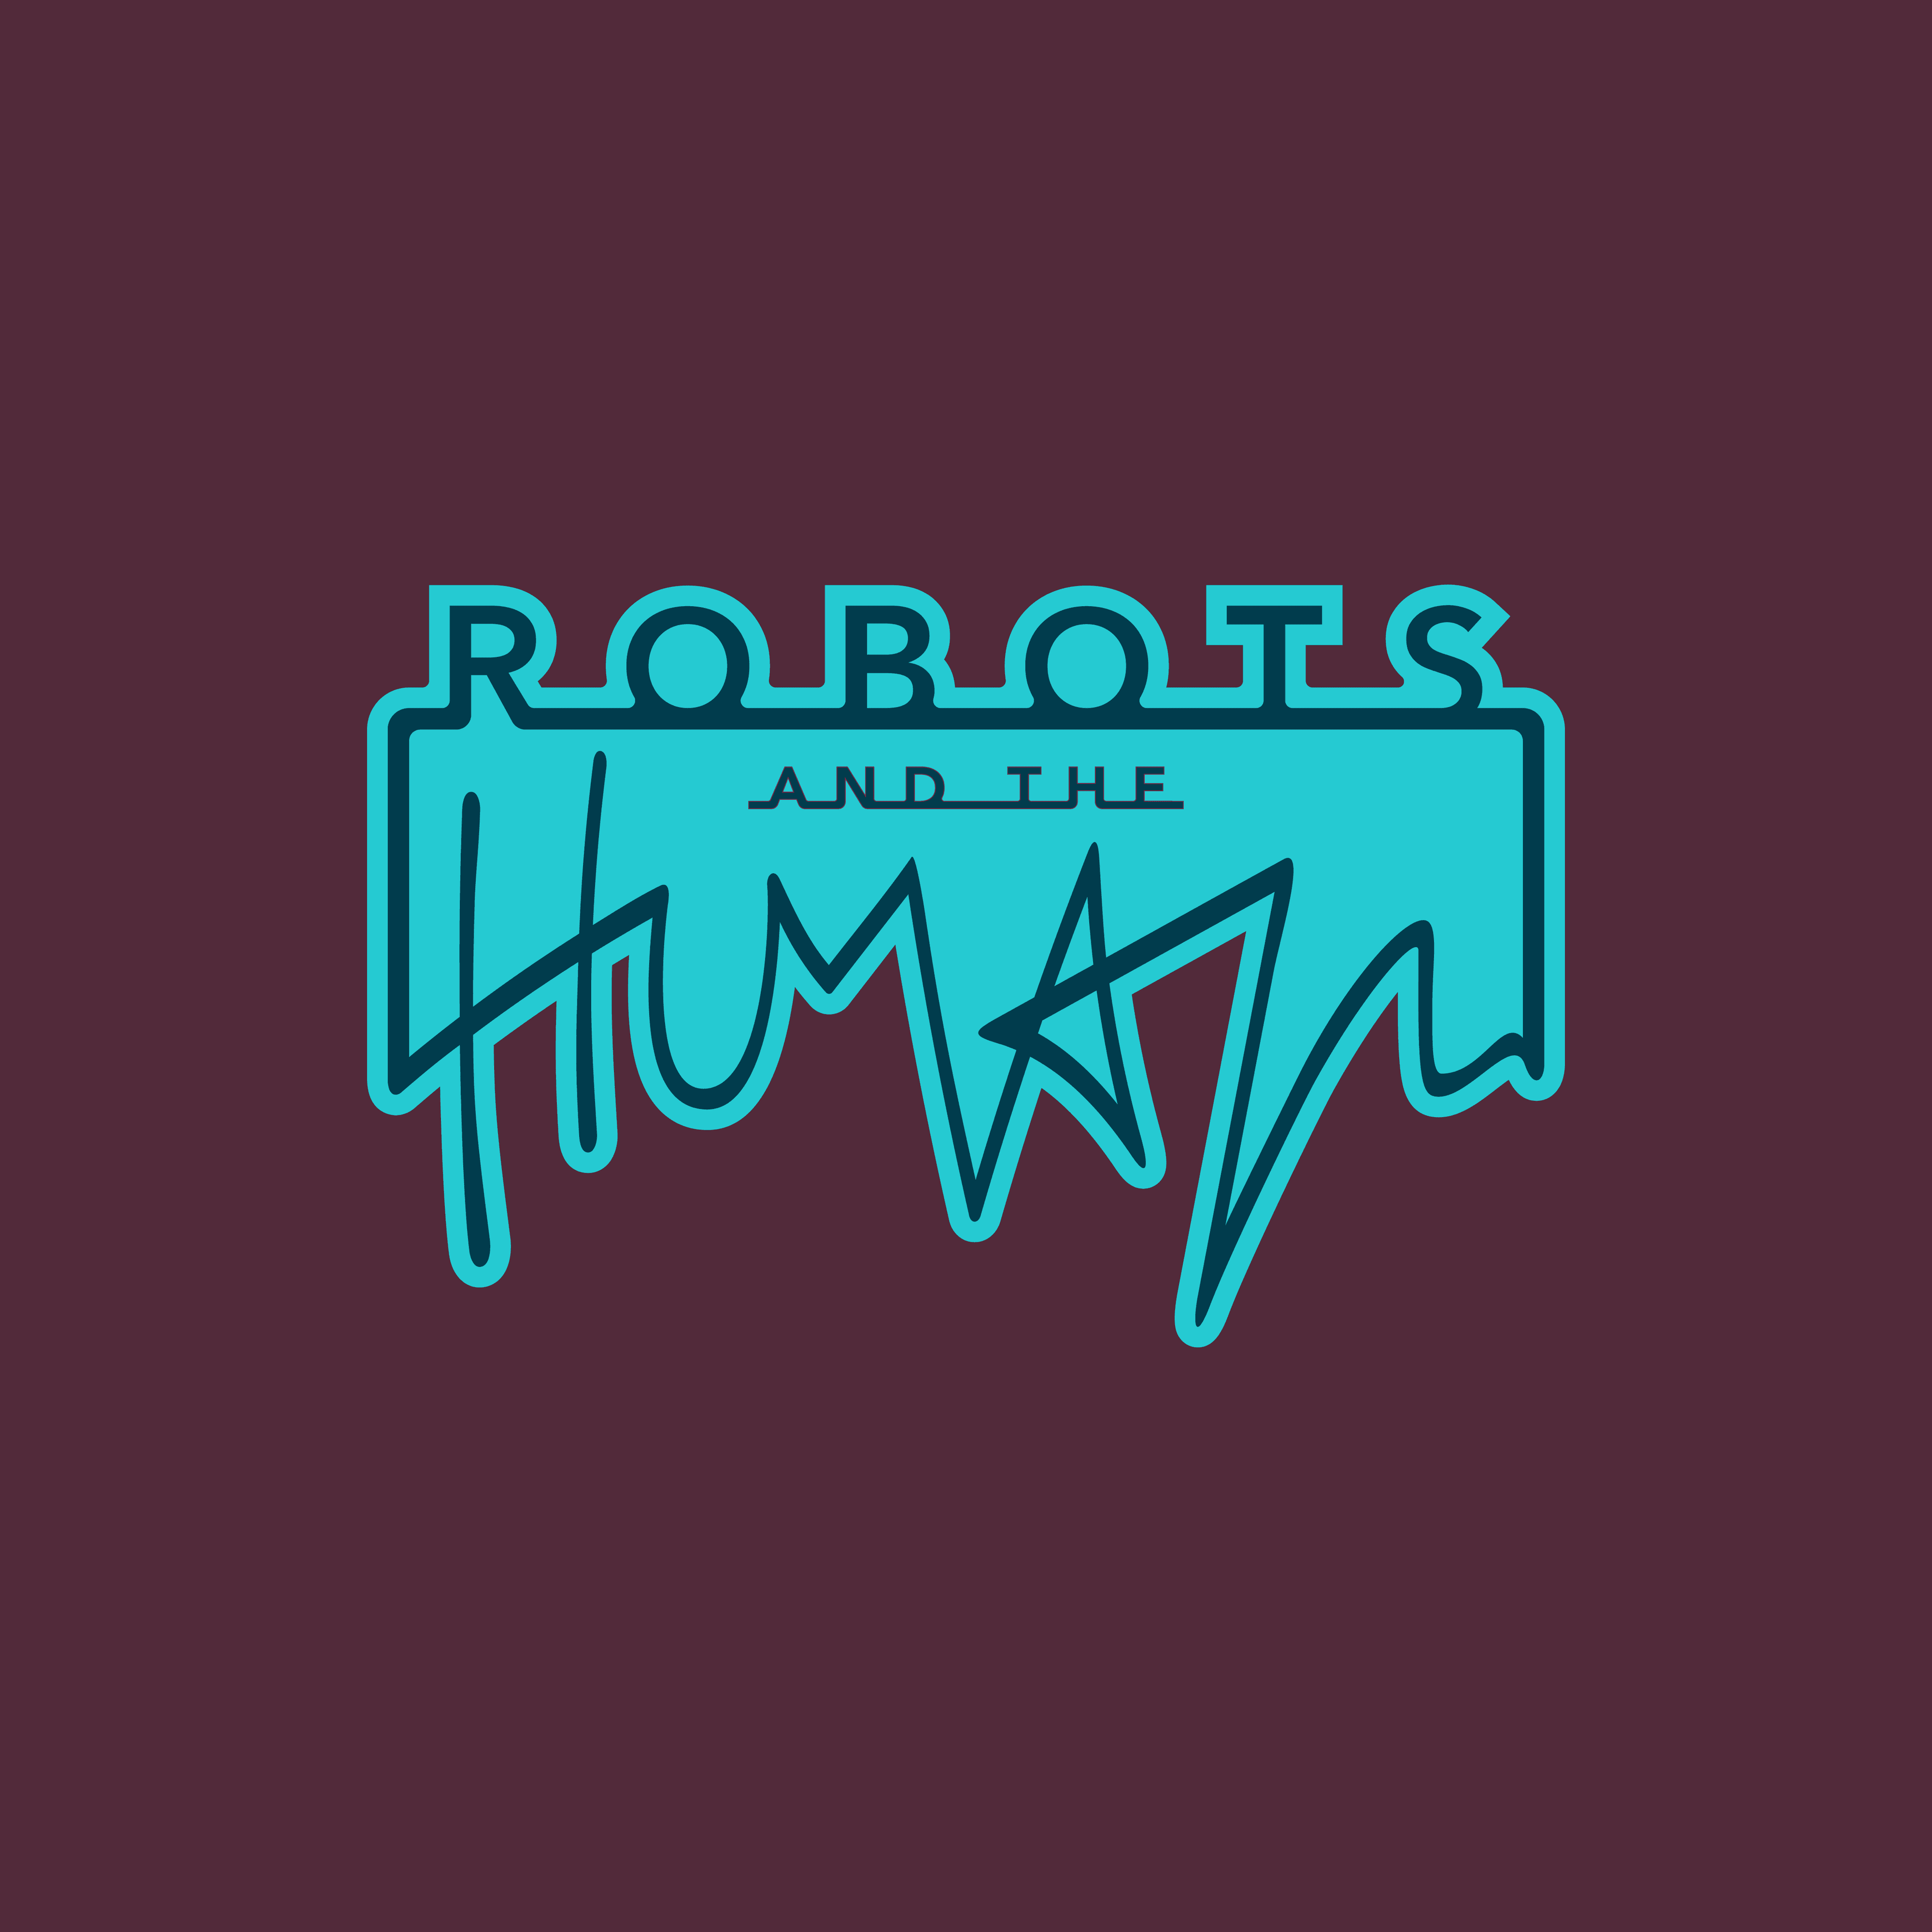 Robots_and_the_Human banner